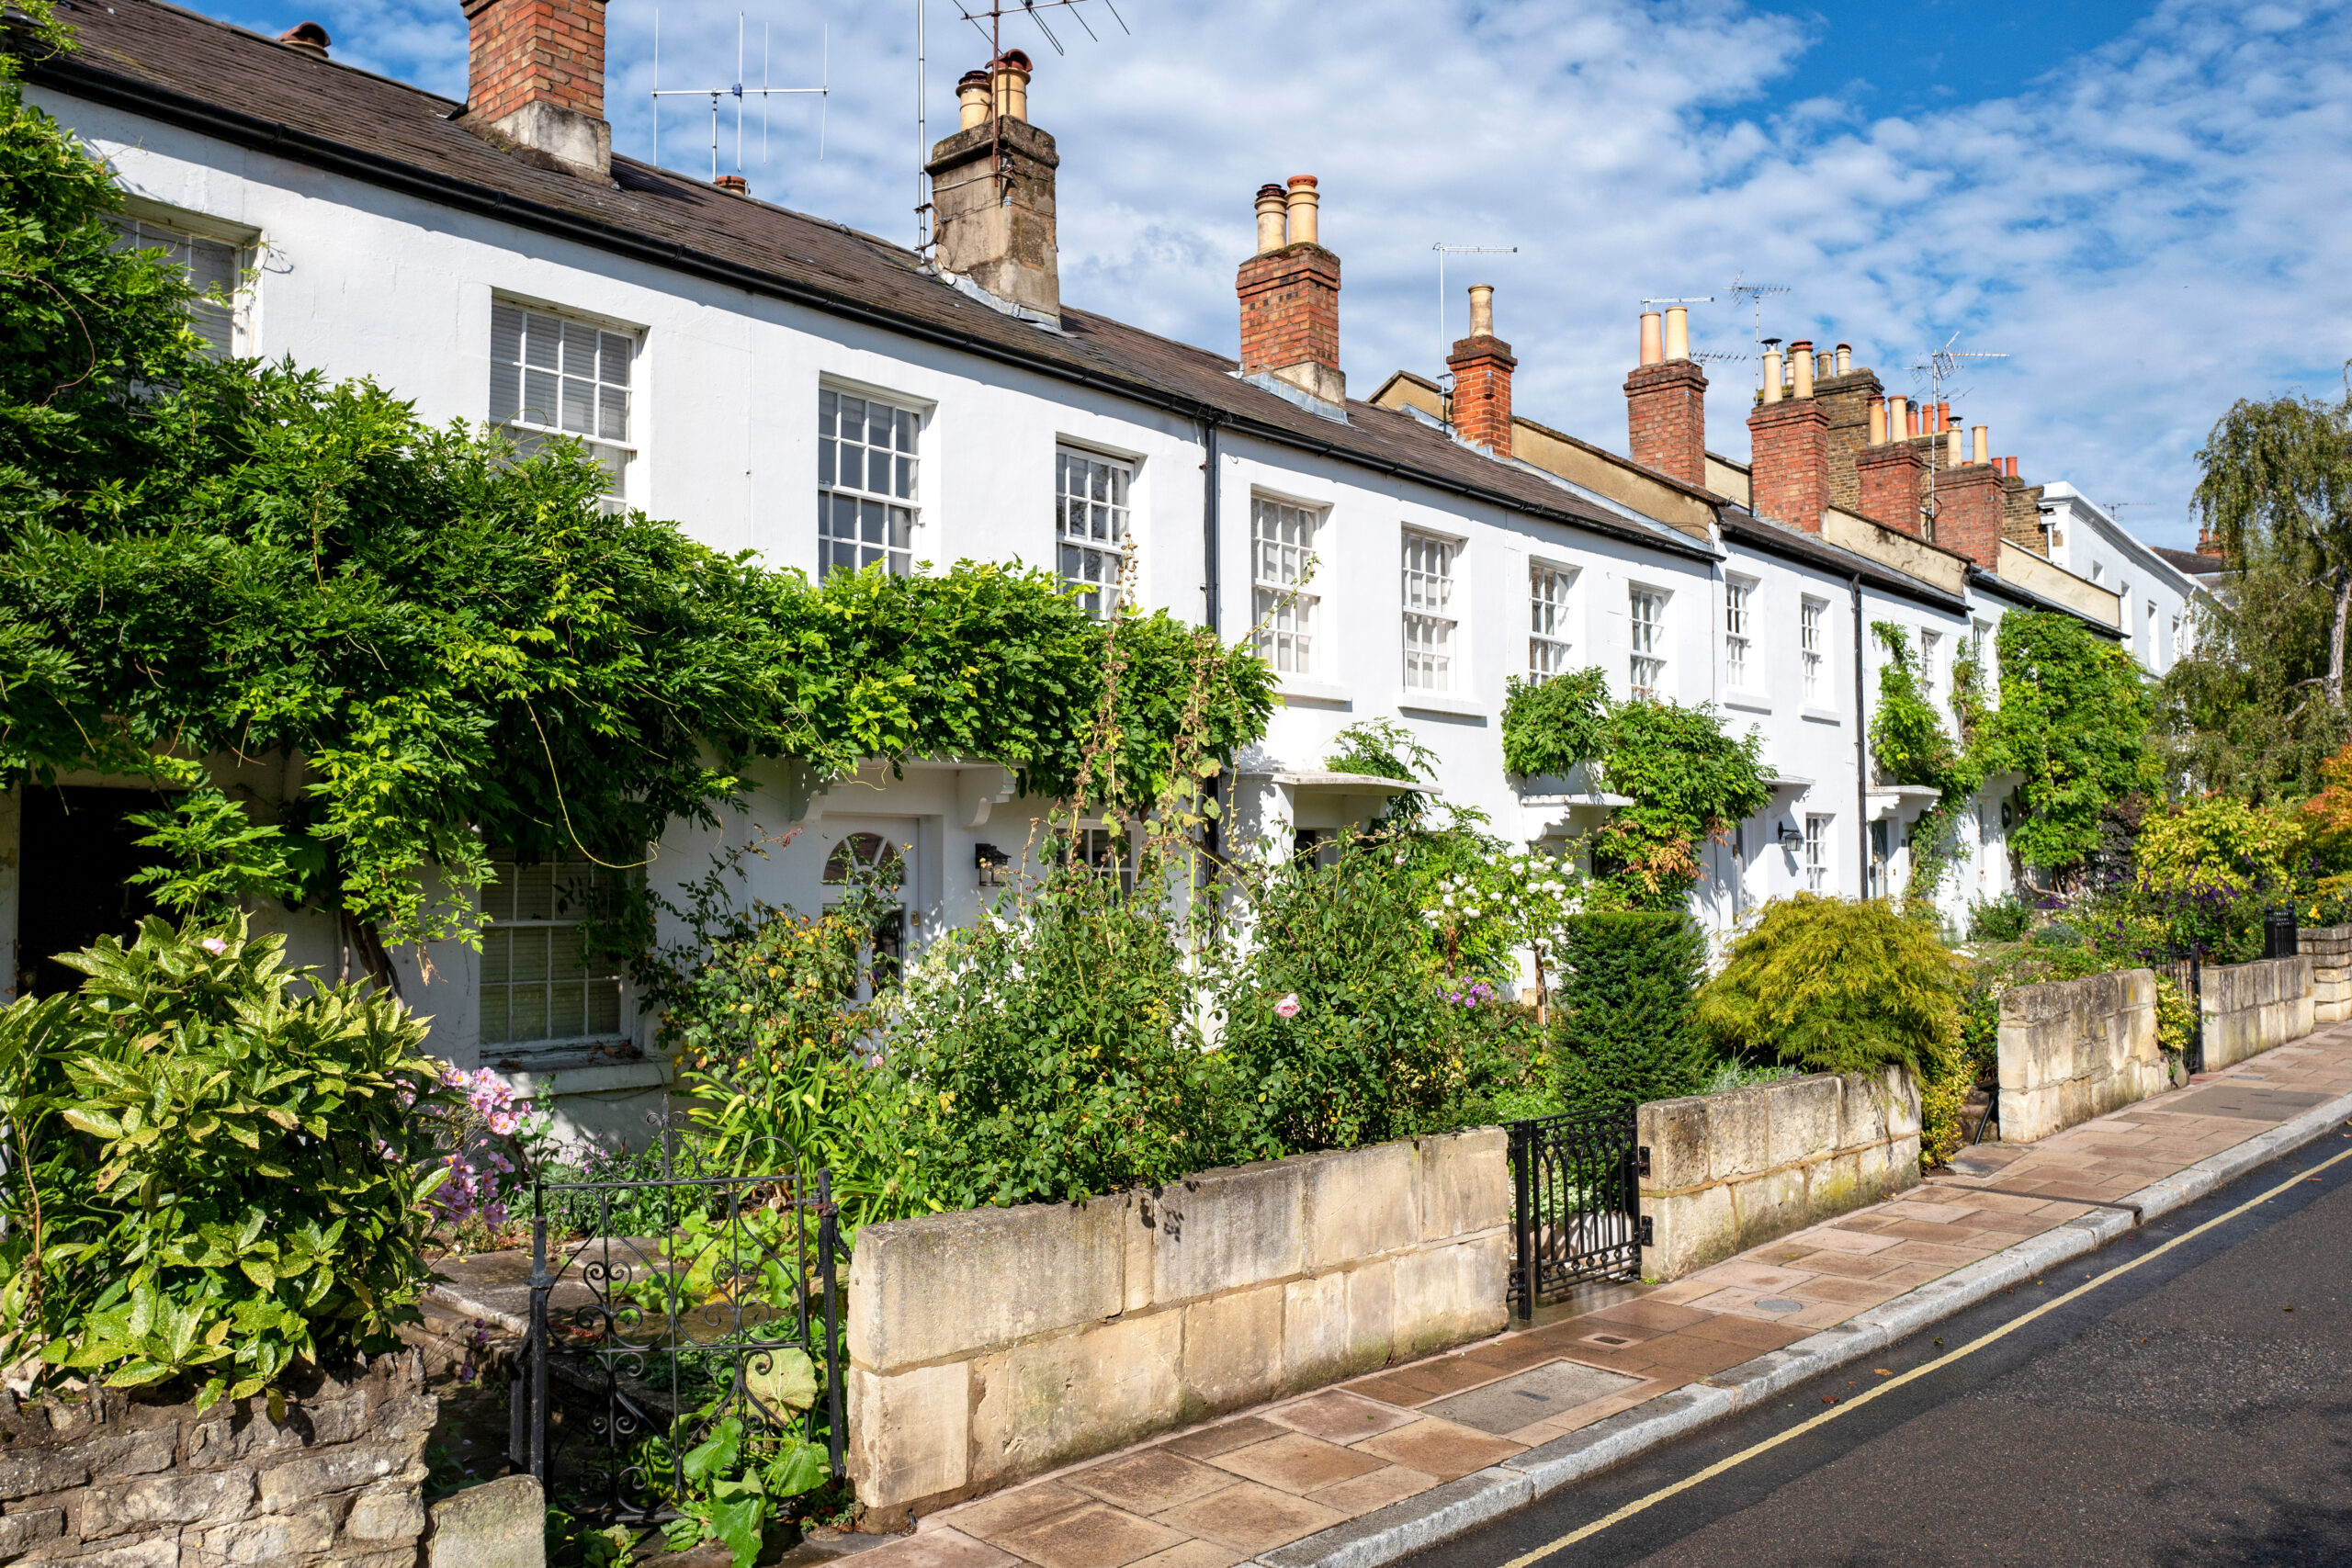 Typical English row of terraced cottages